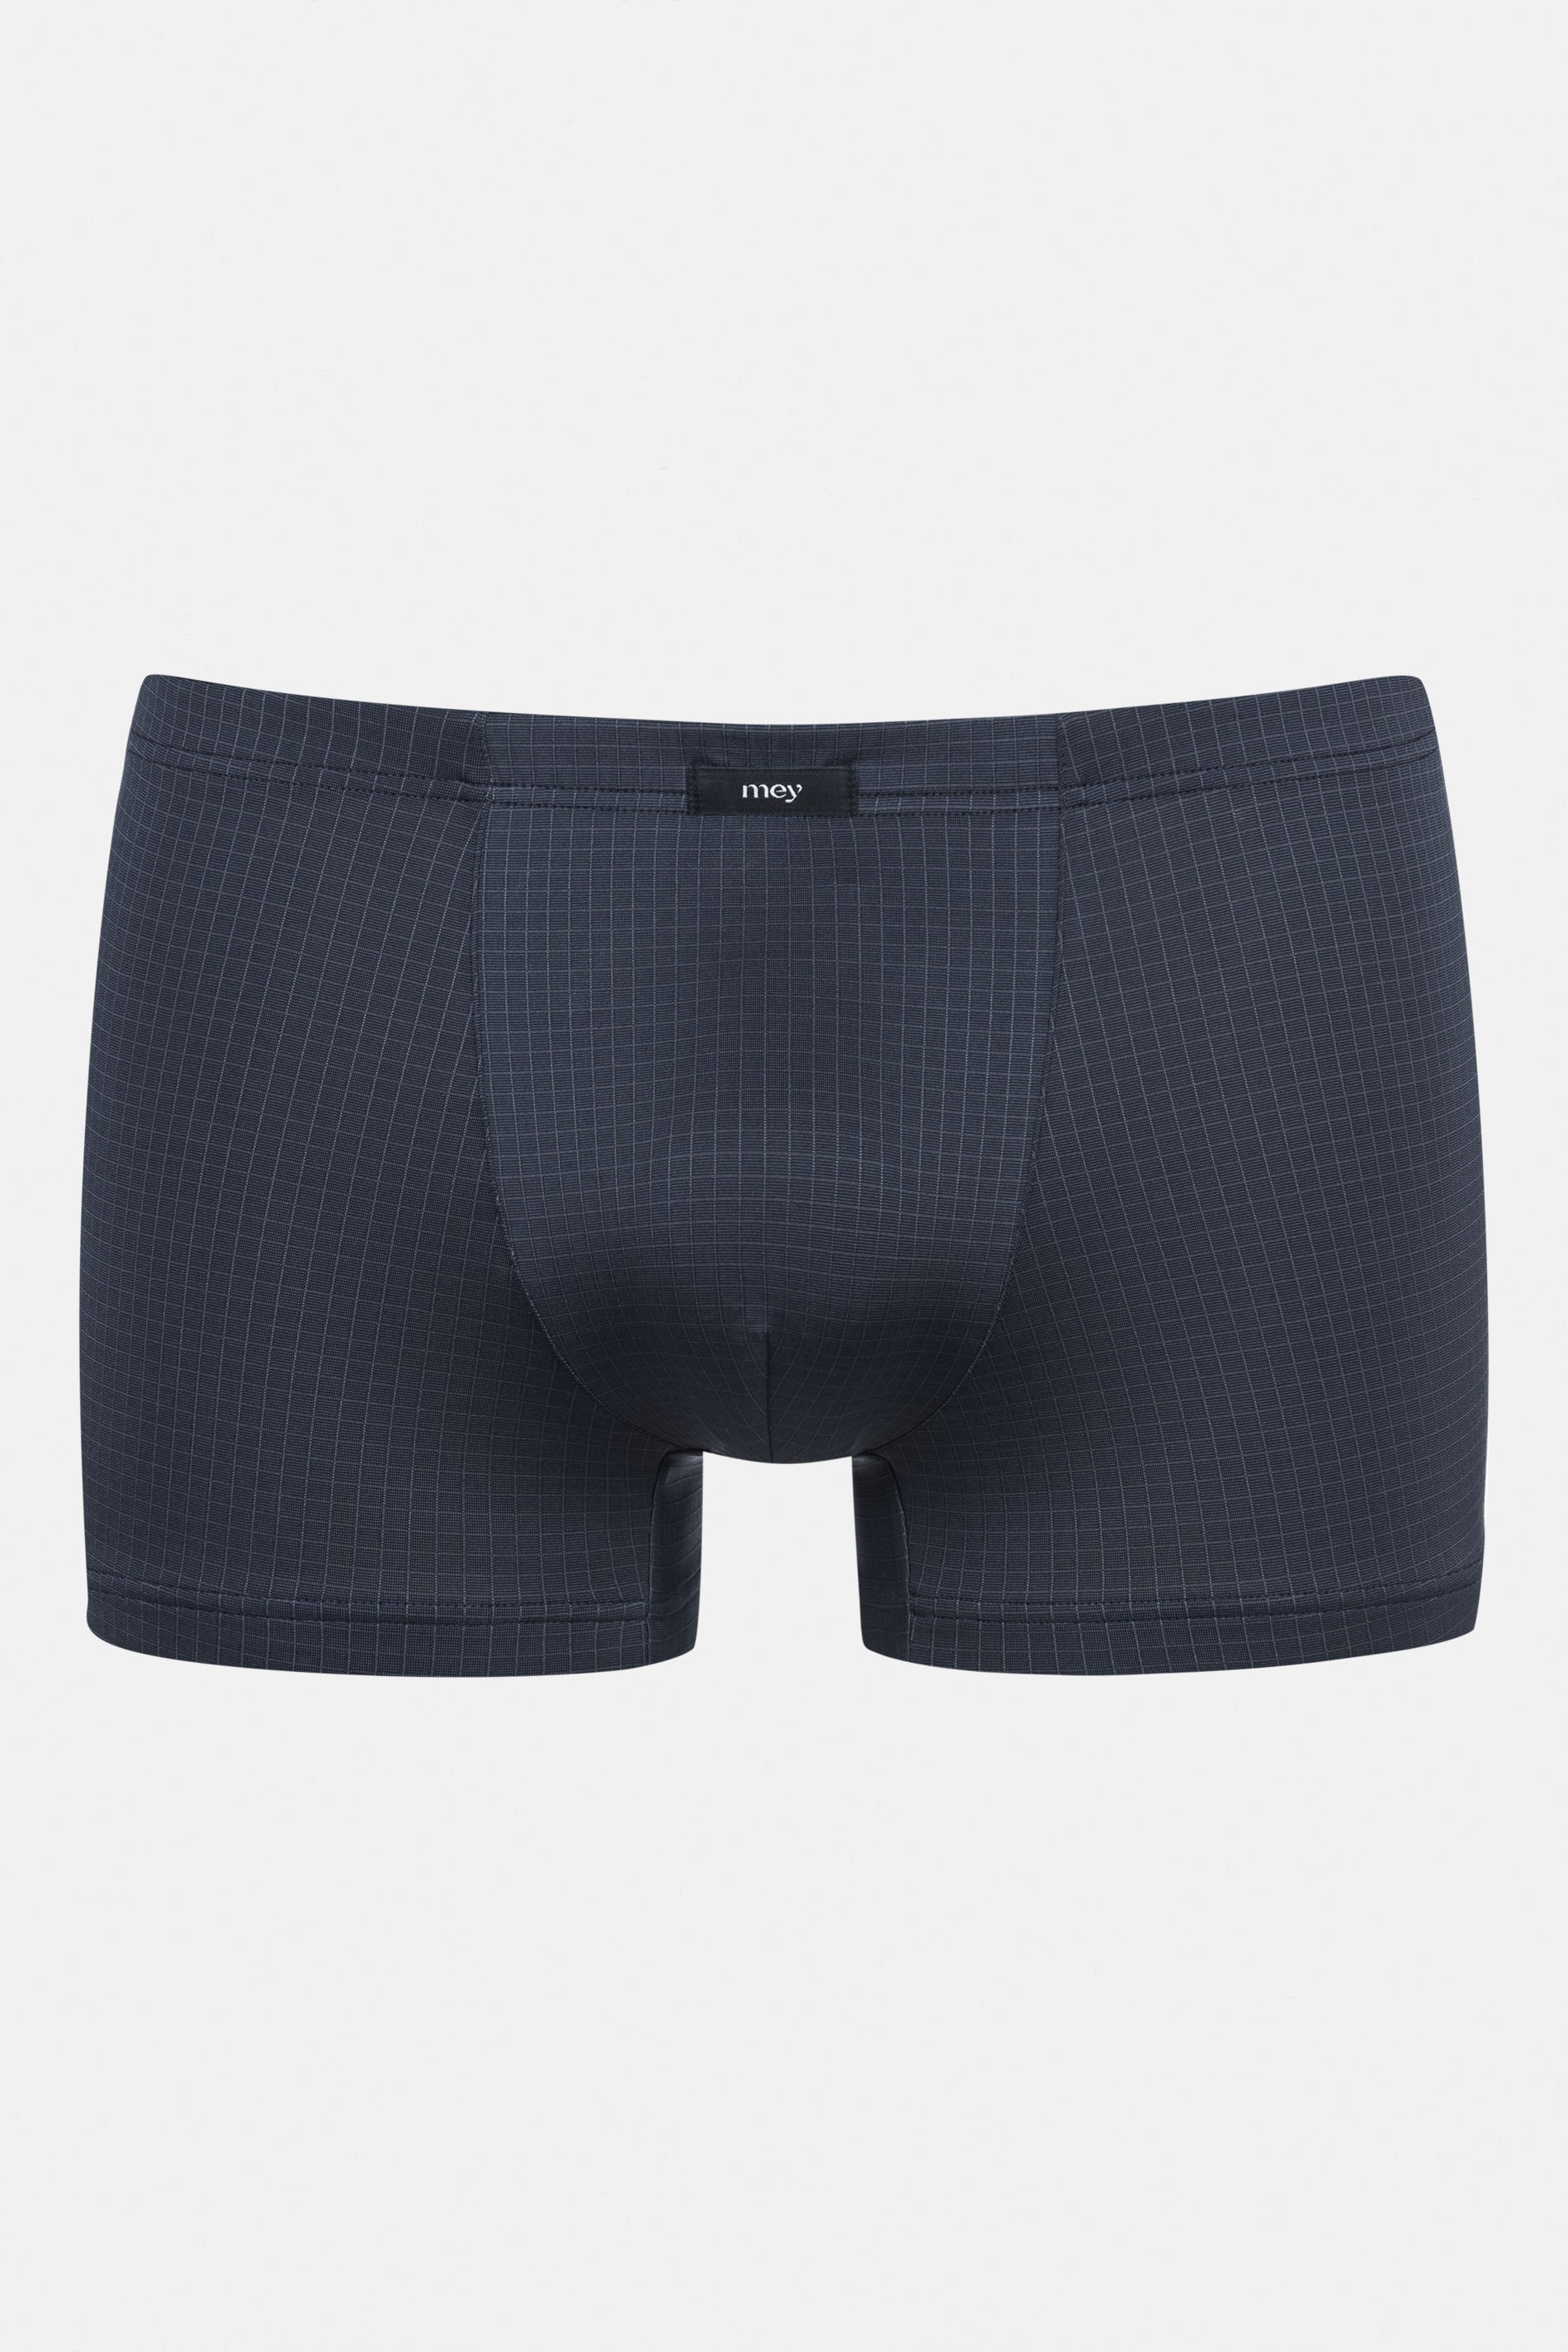 Shorty Serie Blue Check Uitknippen | mey®